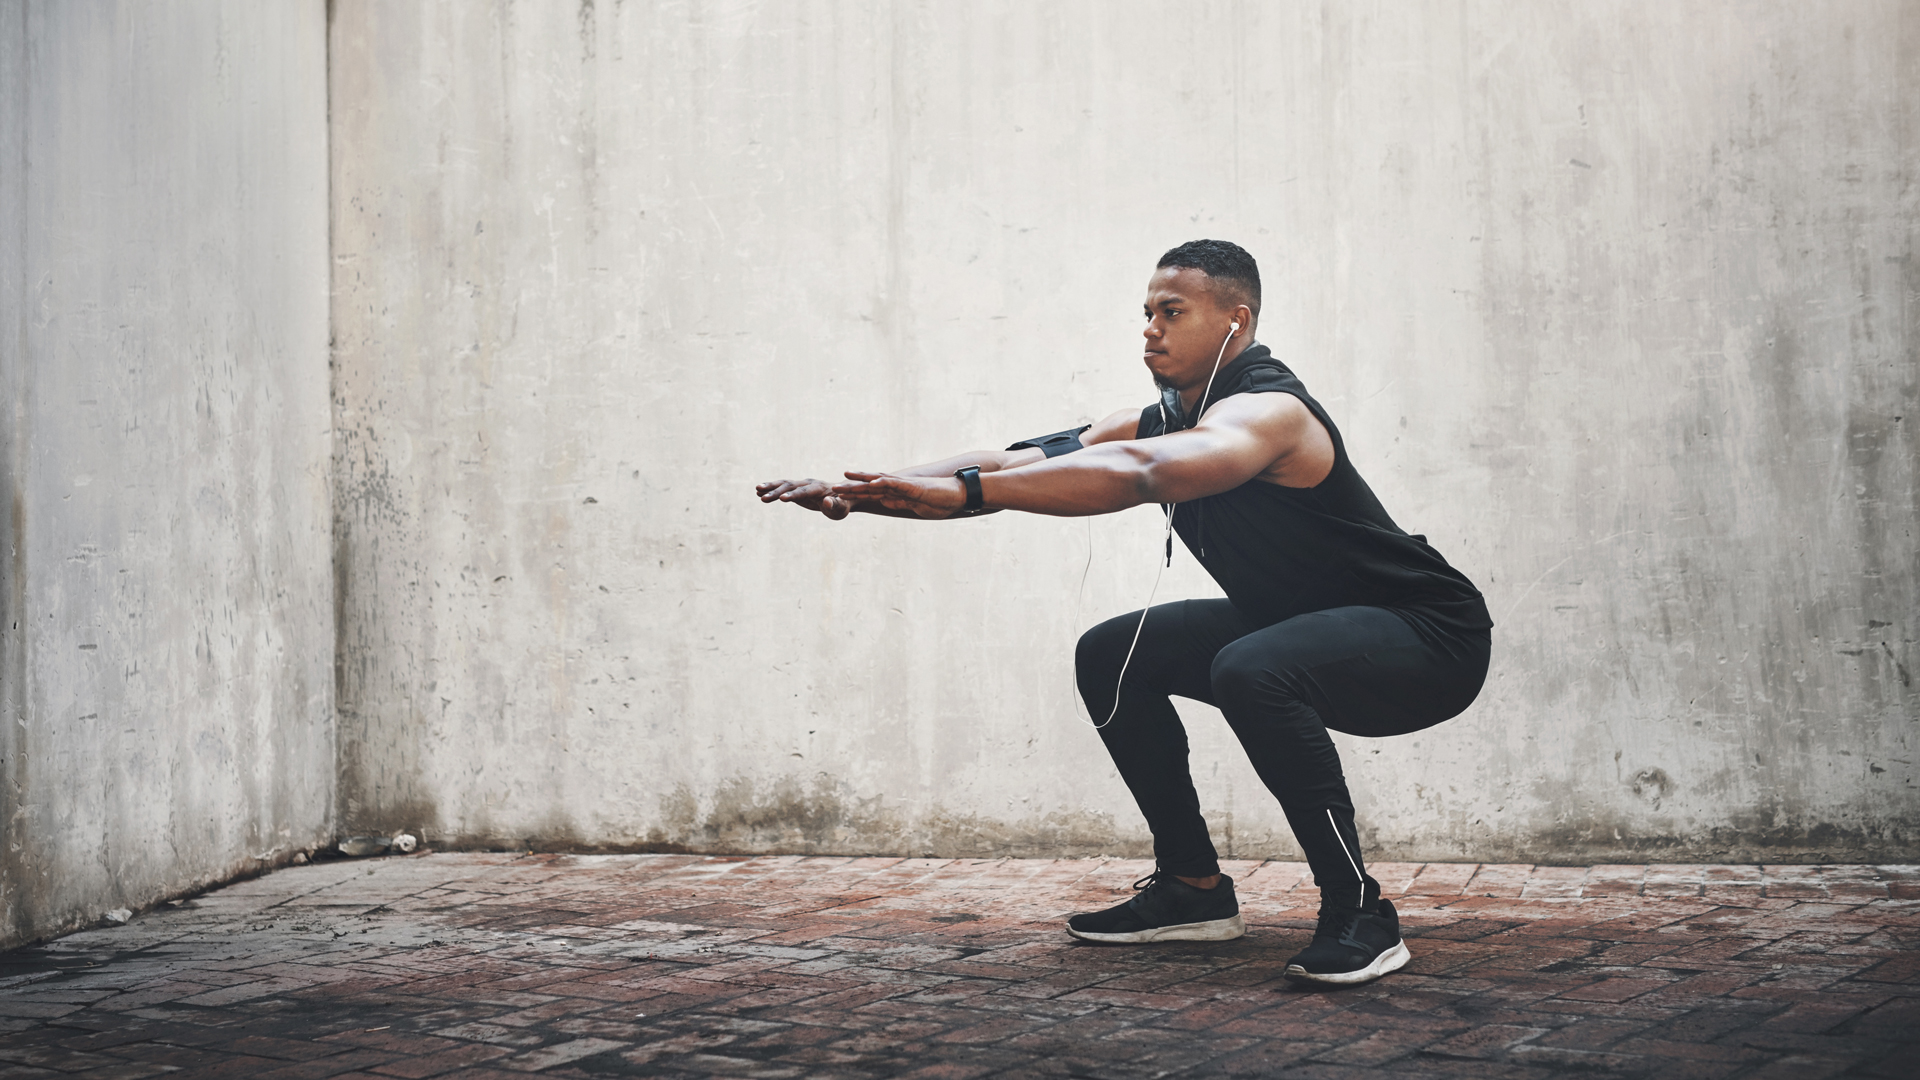 How to squat properly | The GoodLife Fitness Blog